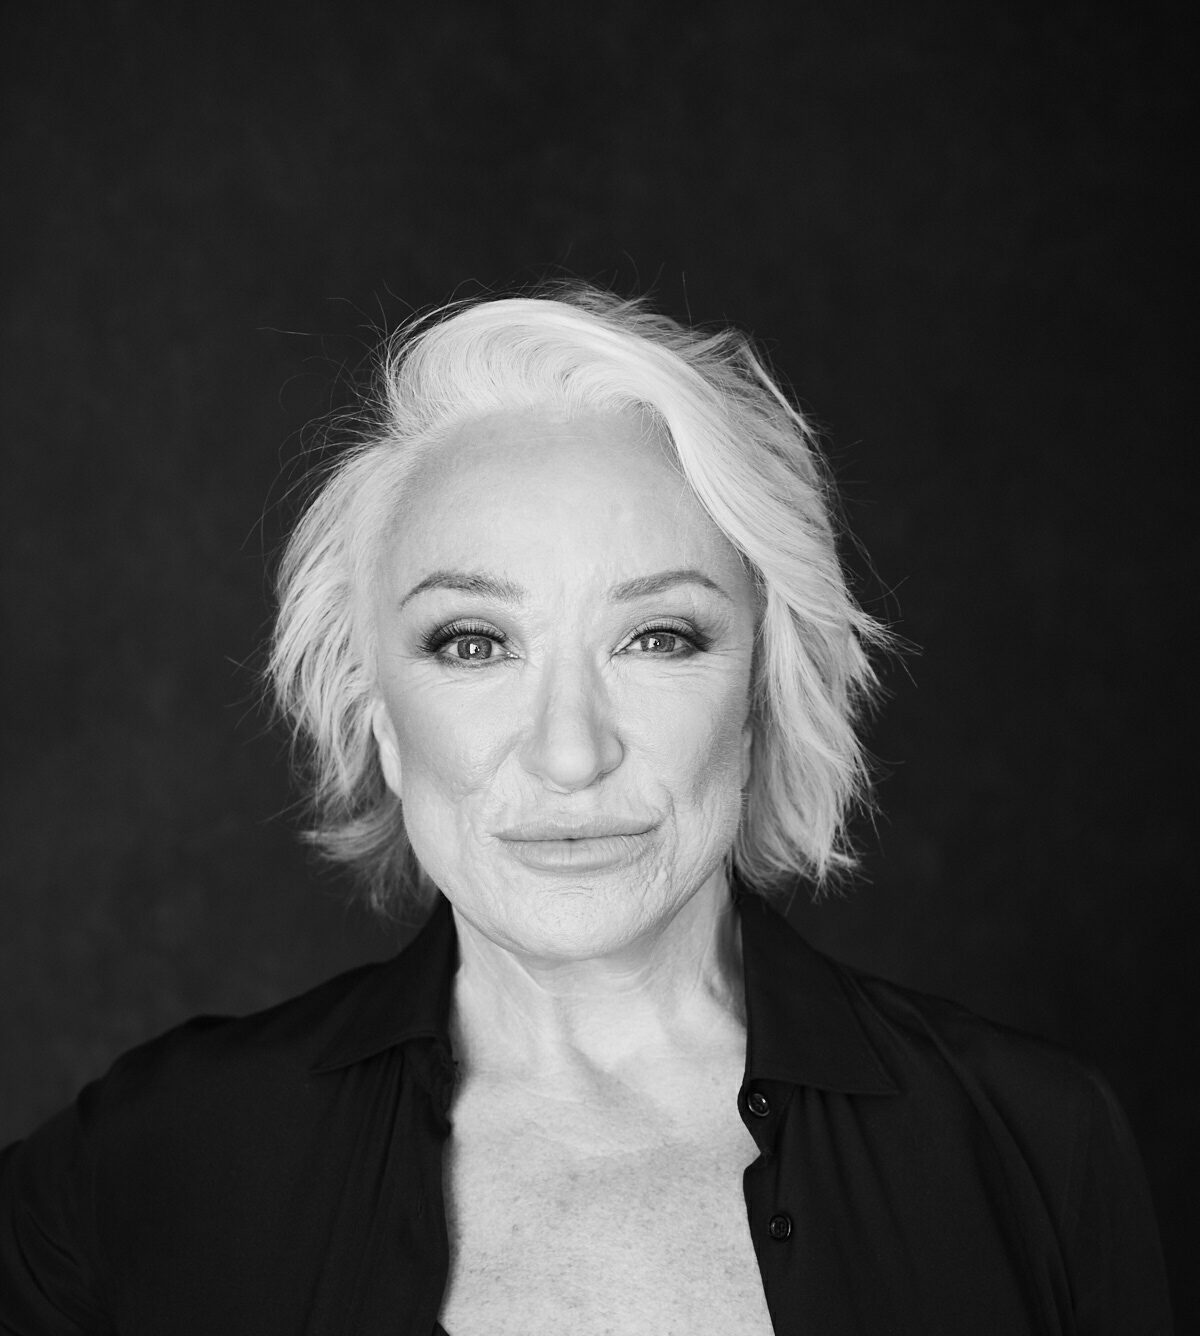 <h1 class="tribe-events-single-event-title">Tanya Tucker at Prairie Band Casino and Resort on Thursday, October 6th</h1>